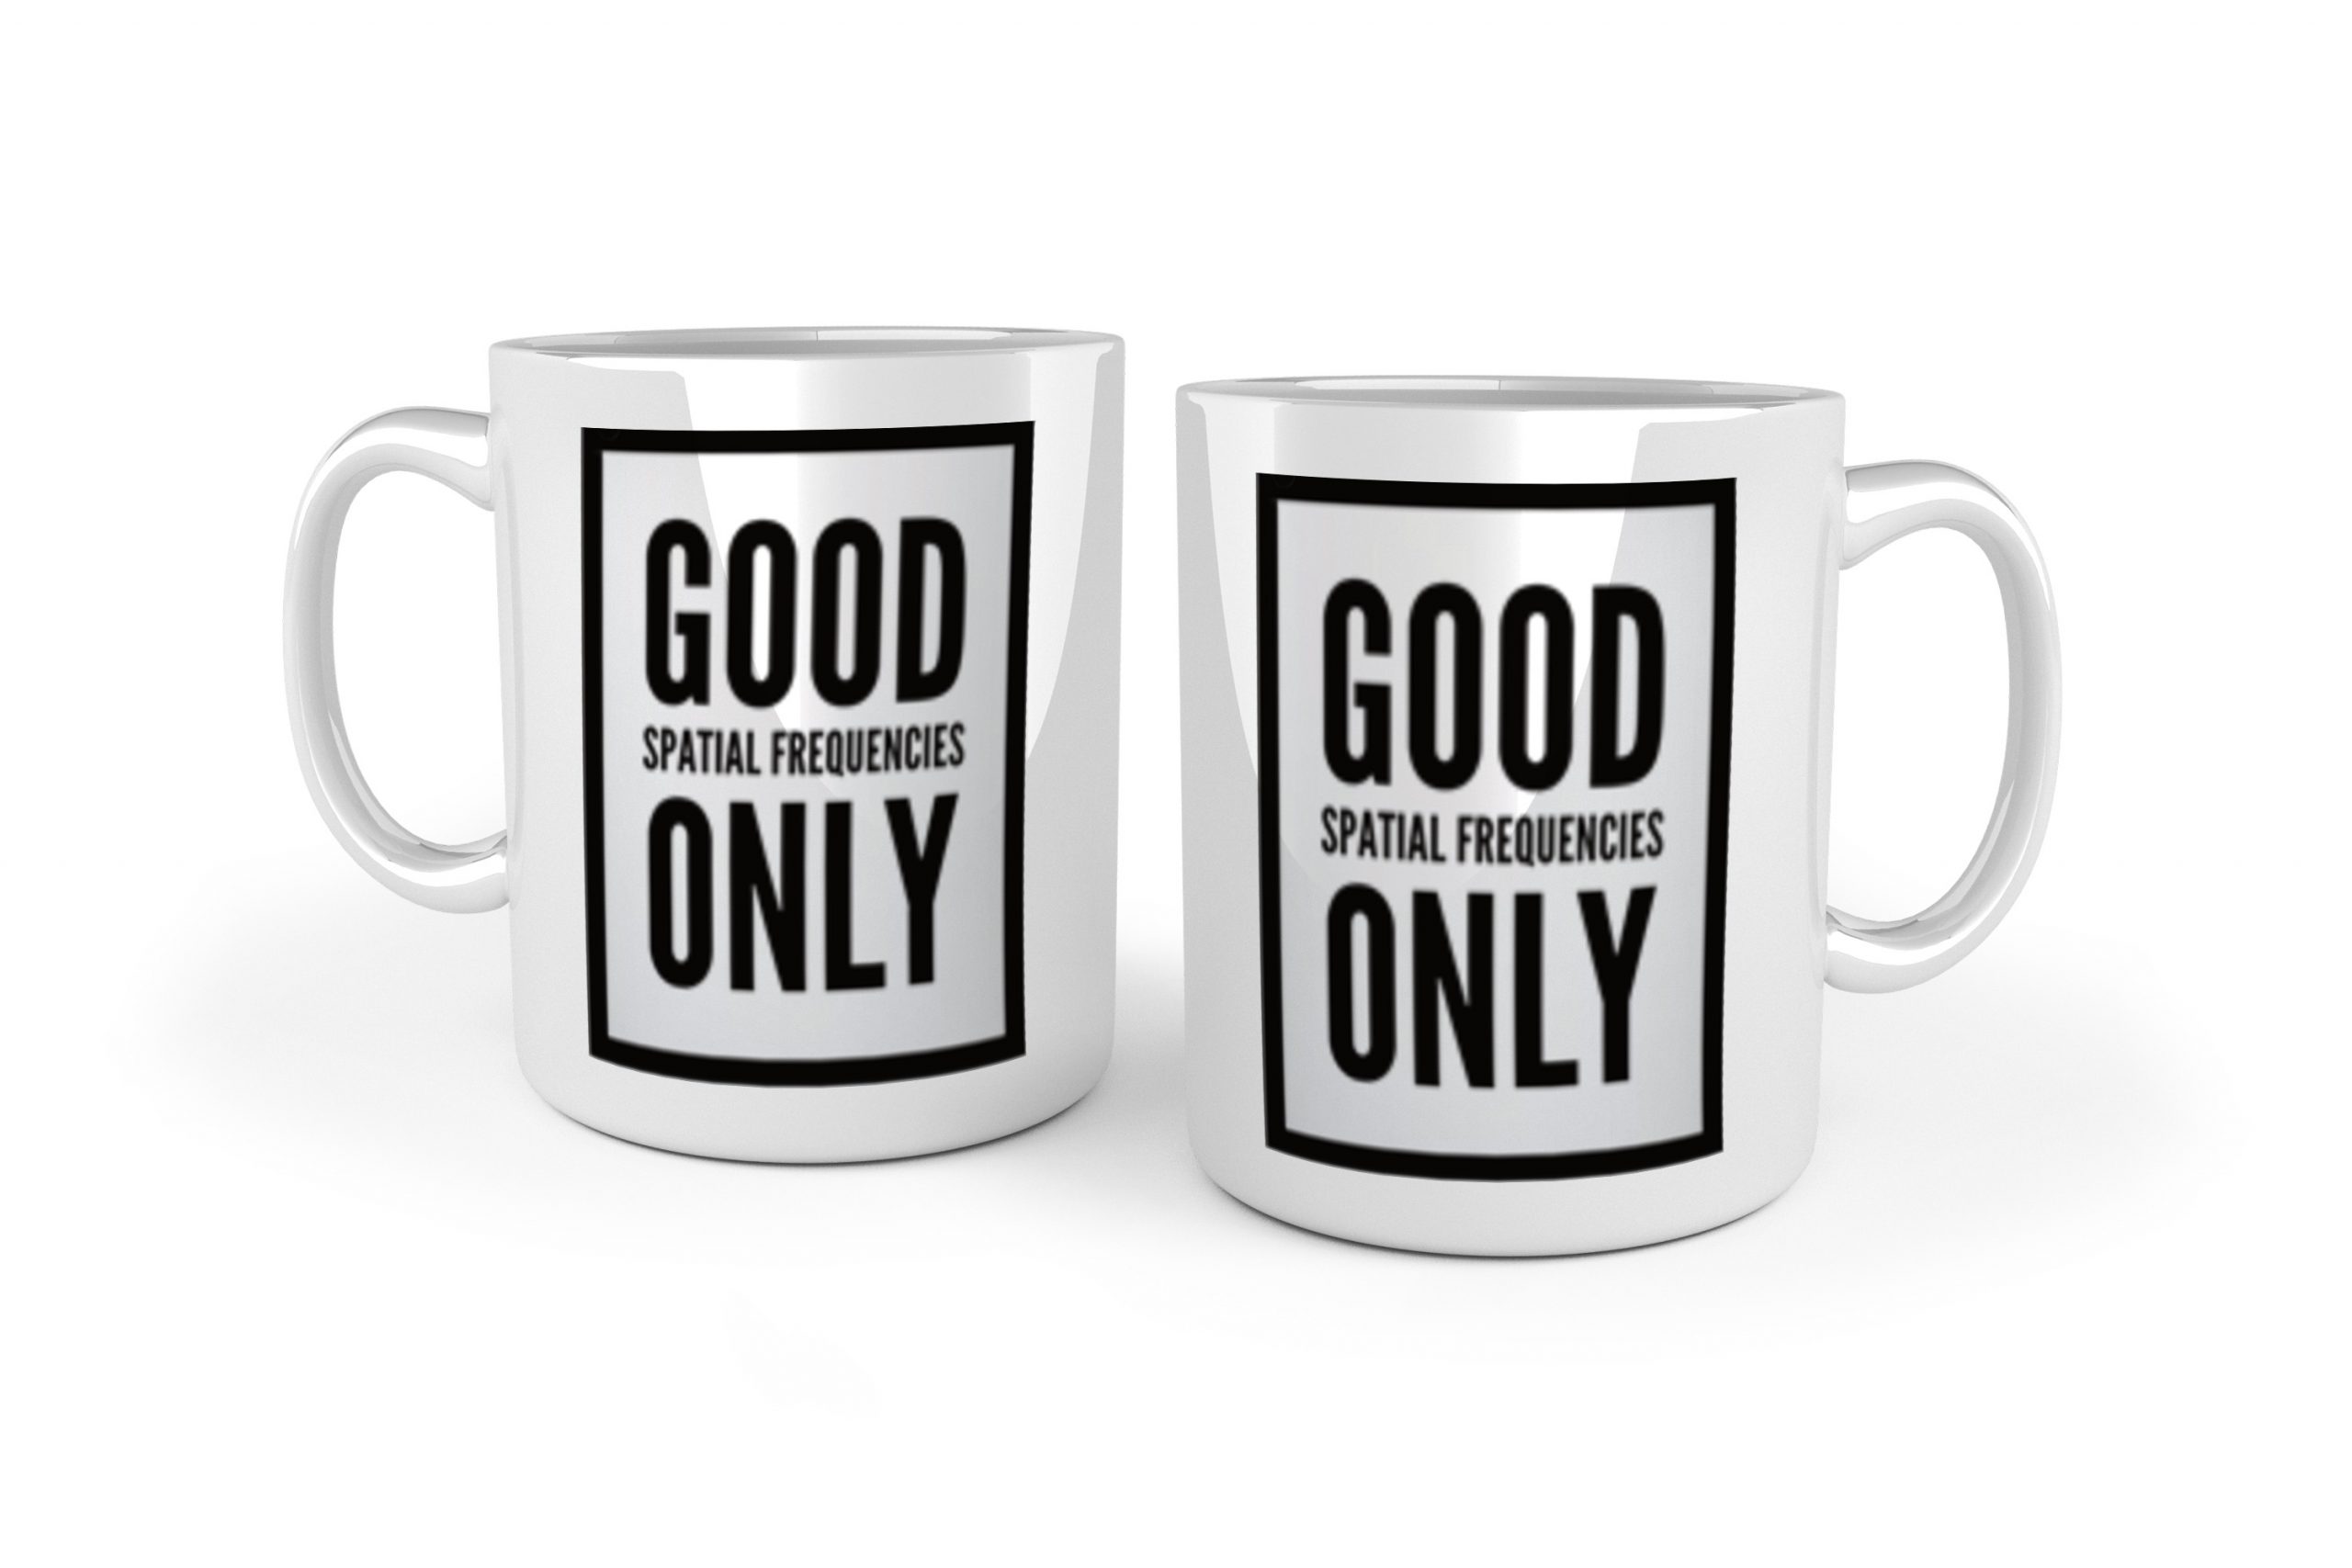 Good Spatial Frequencies Only – White Ceramic Mug